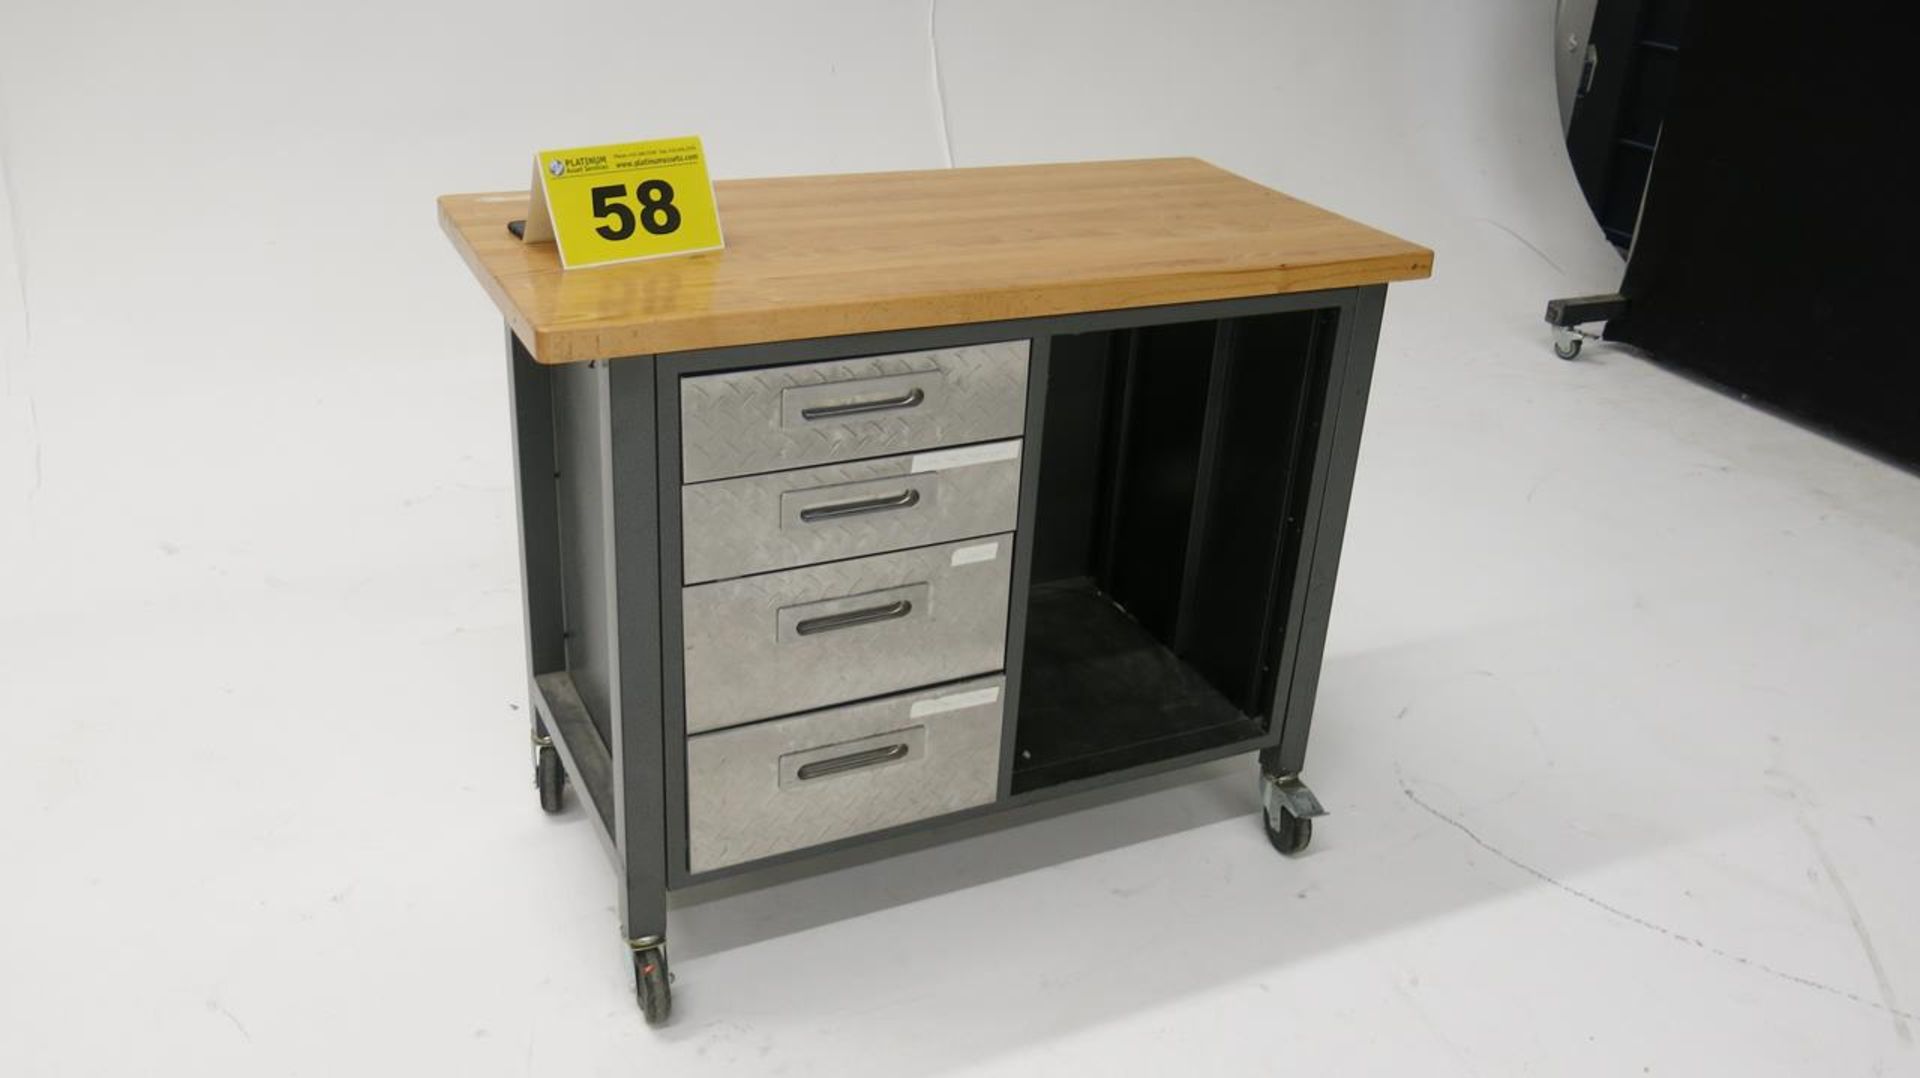 STAINLESS STEEL, 4 DRAWER, WORKBENCH WITH WOOD TOP AND DESK - Image 2 of 2